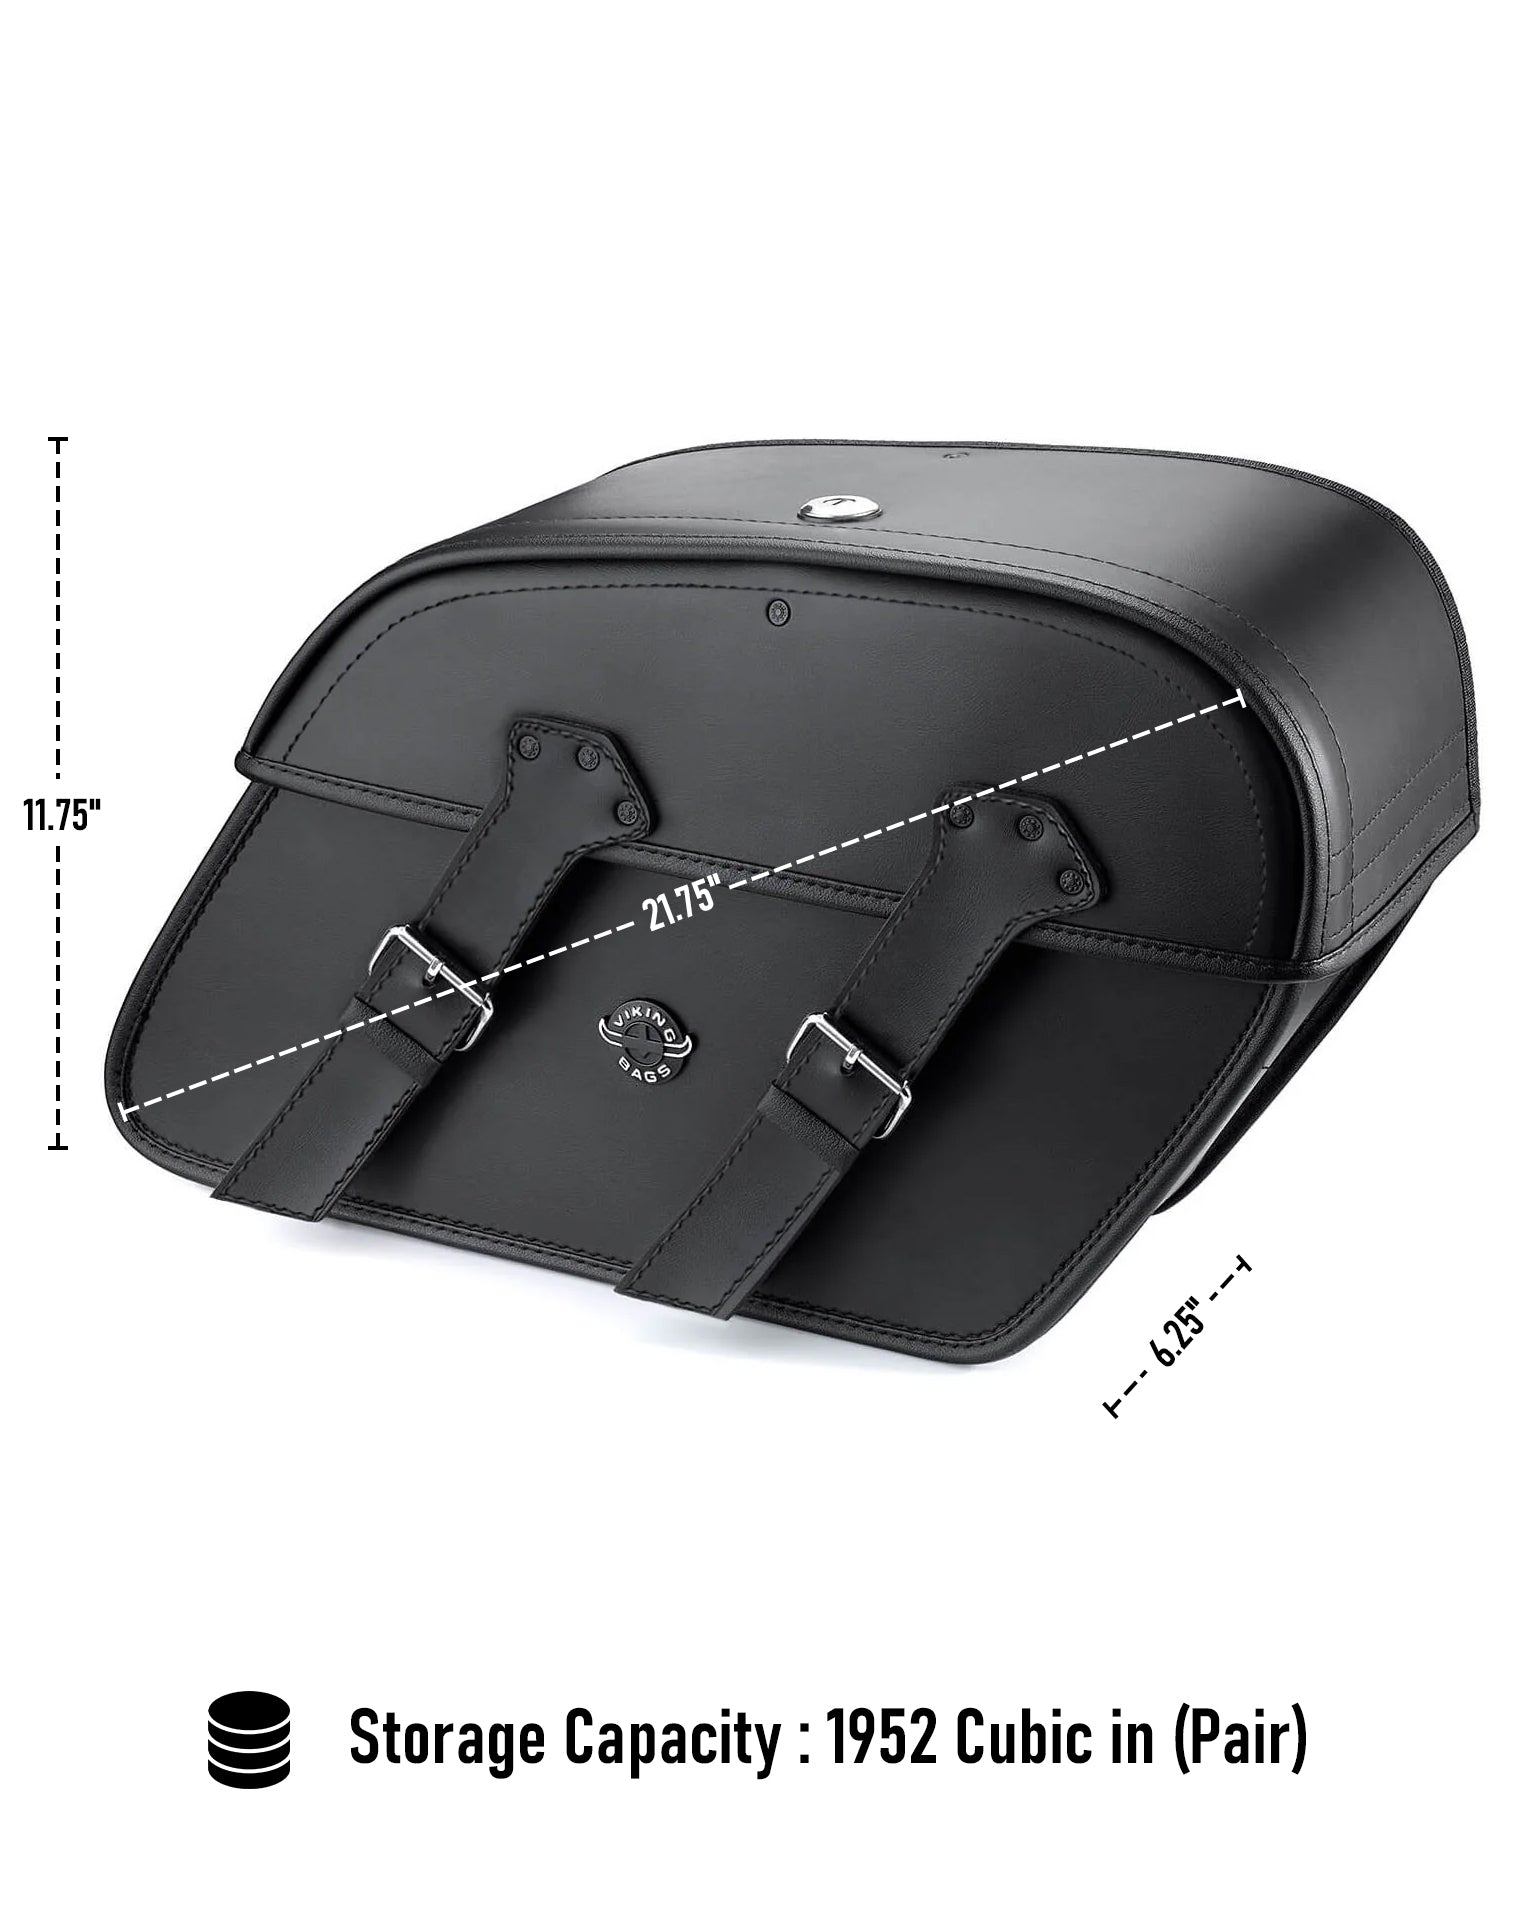 Viking Raven Large Kawasaki Vulcan S Motorcycle Leather Saddlebags Can Store Your Ridings Gears